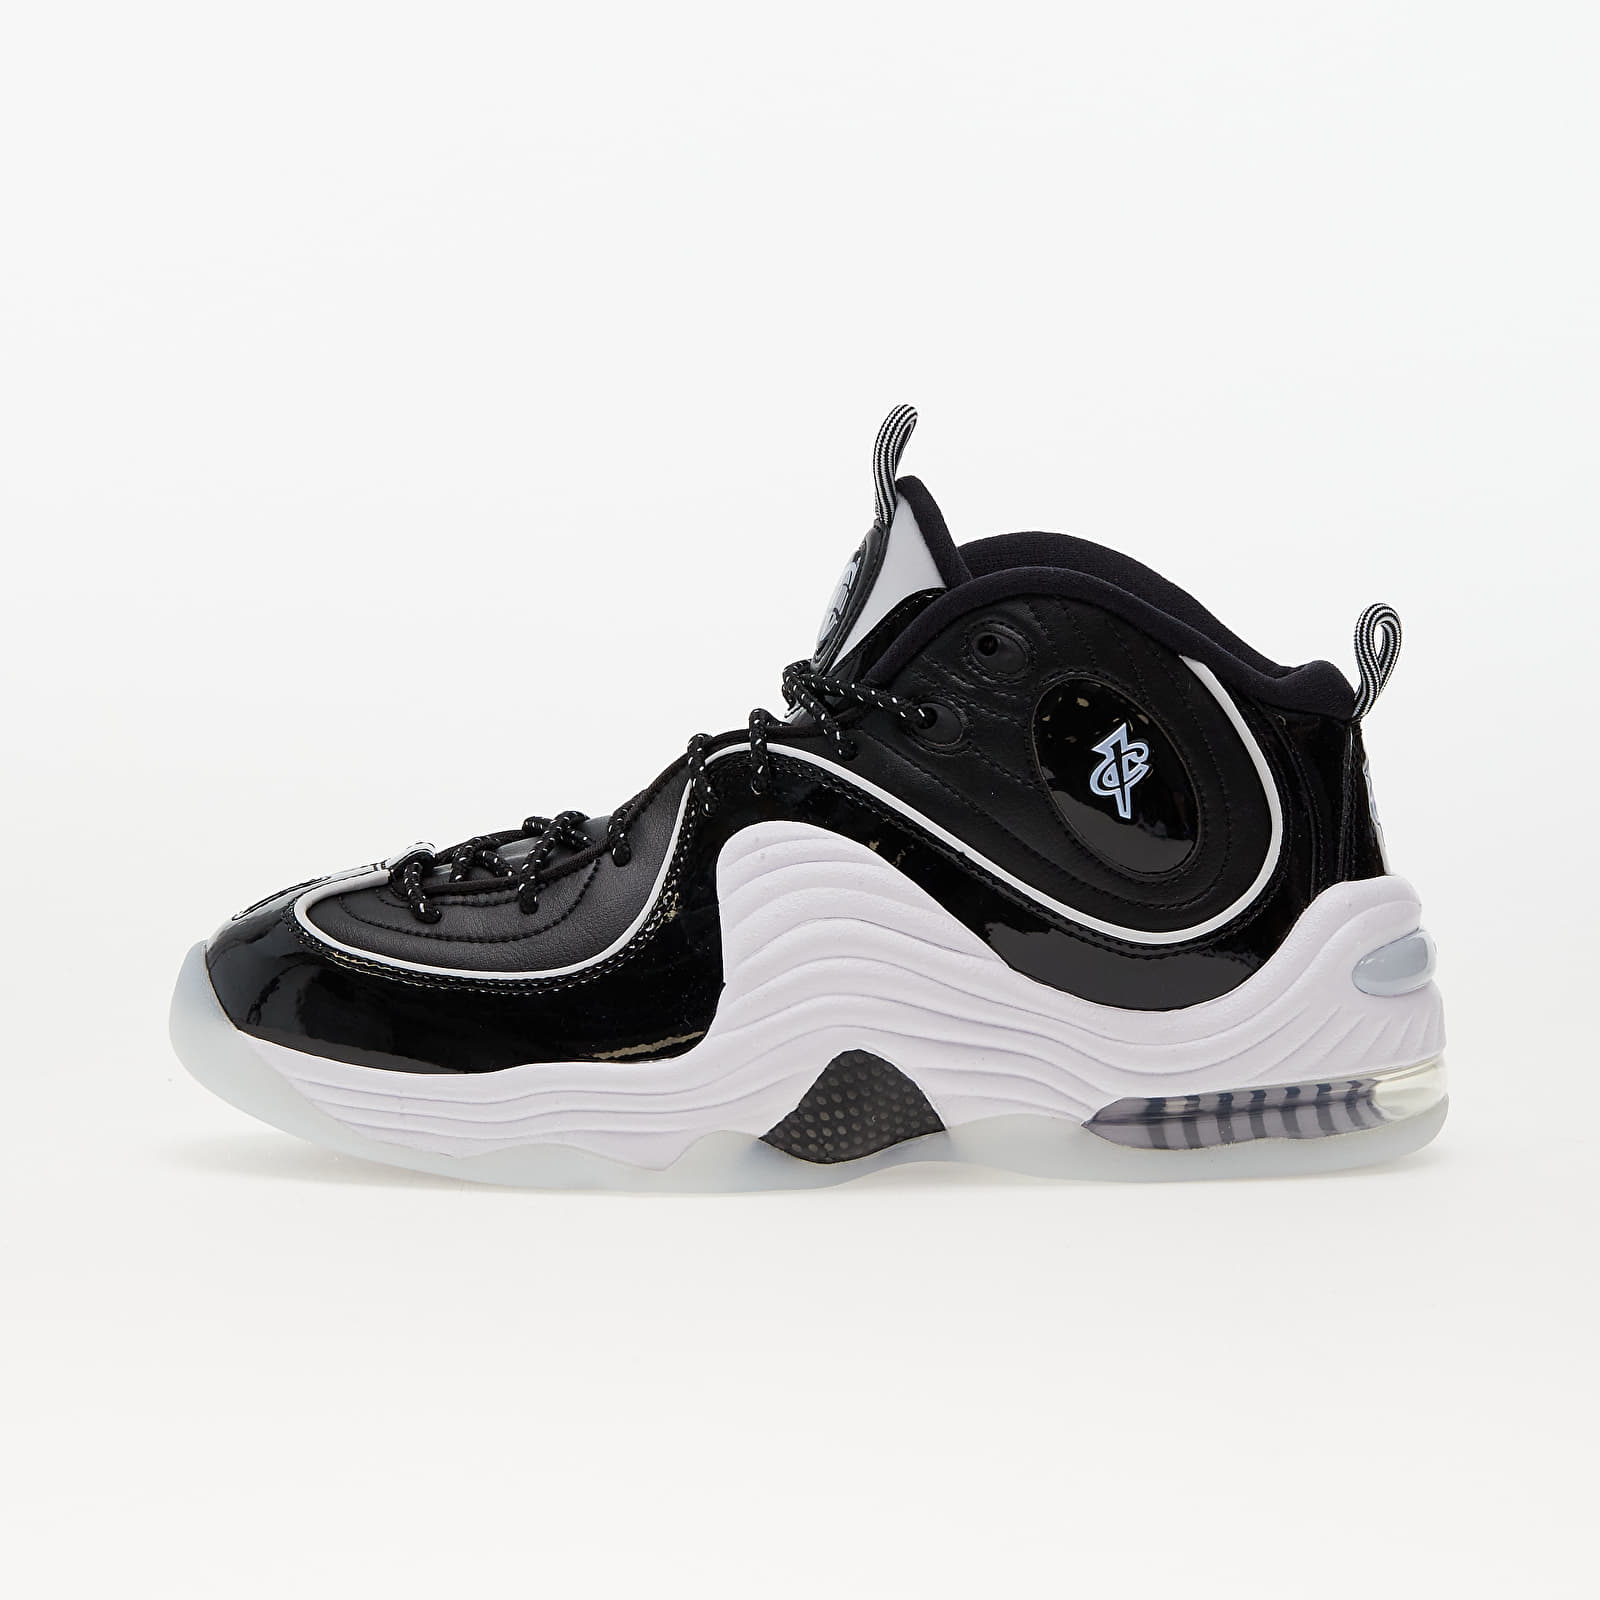 Chaussures et baskets homme Nike Air Penny 2 Black/ Multi-Color-White-Football Grey